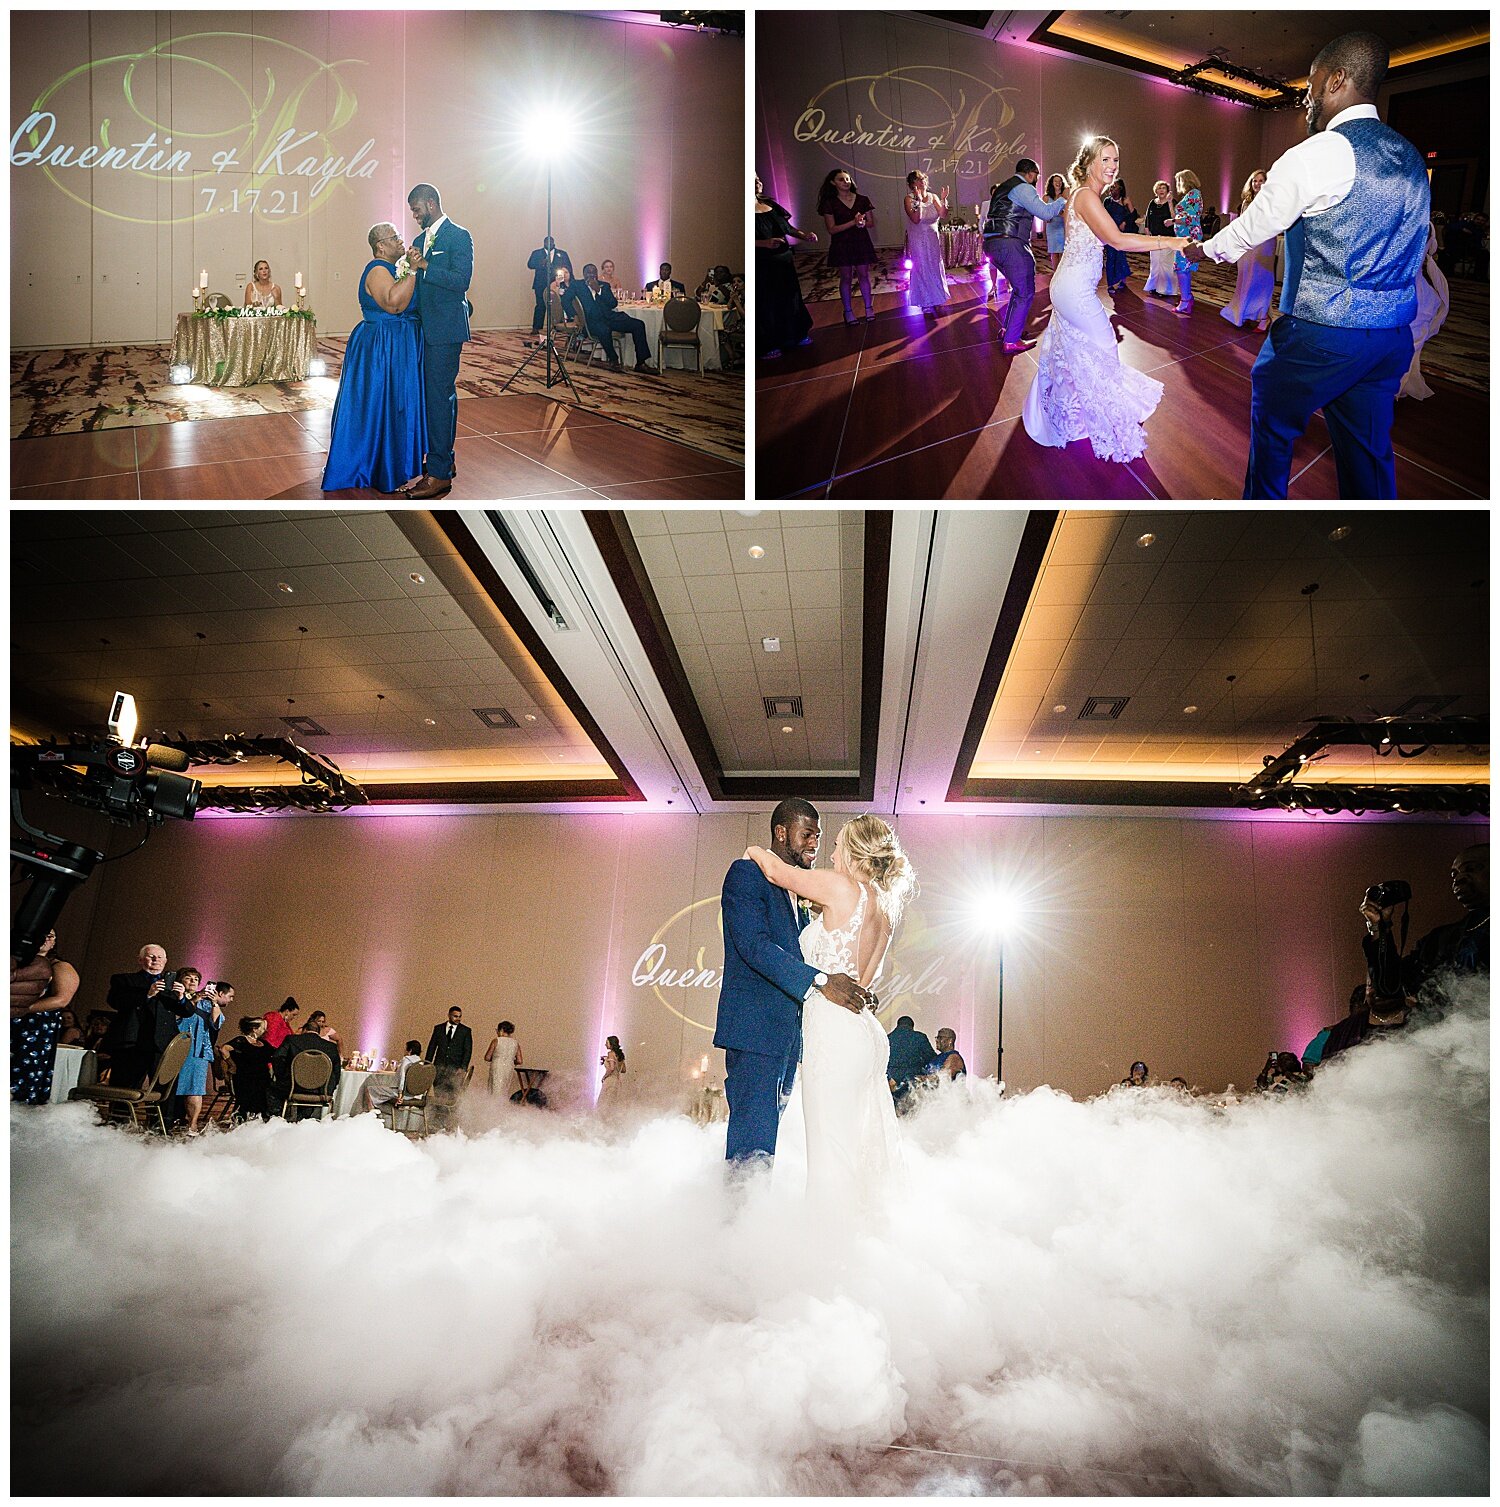  Newlyweds dance the night away with wedding guests on fog covered dance floor 